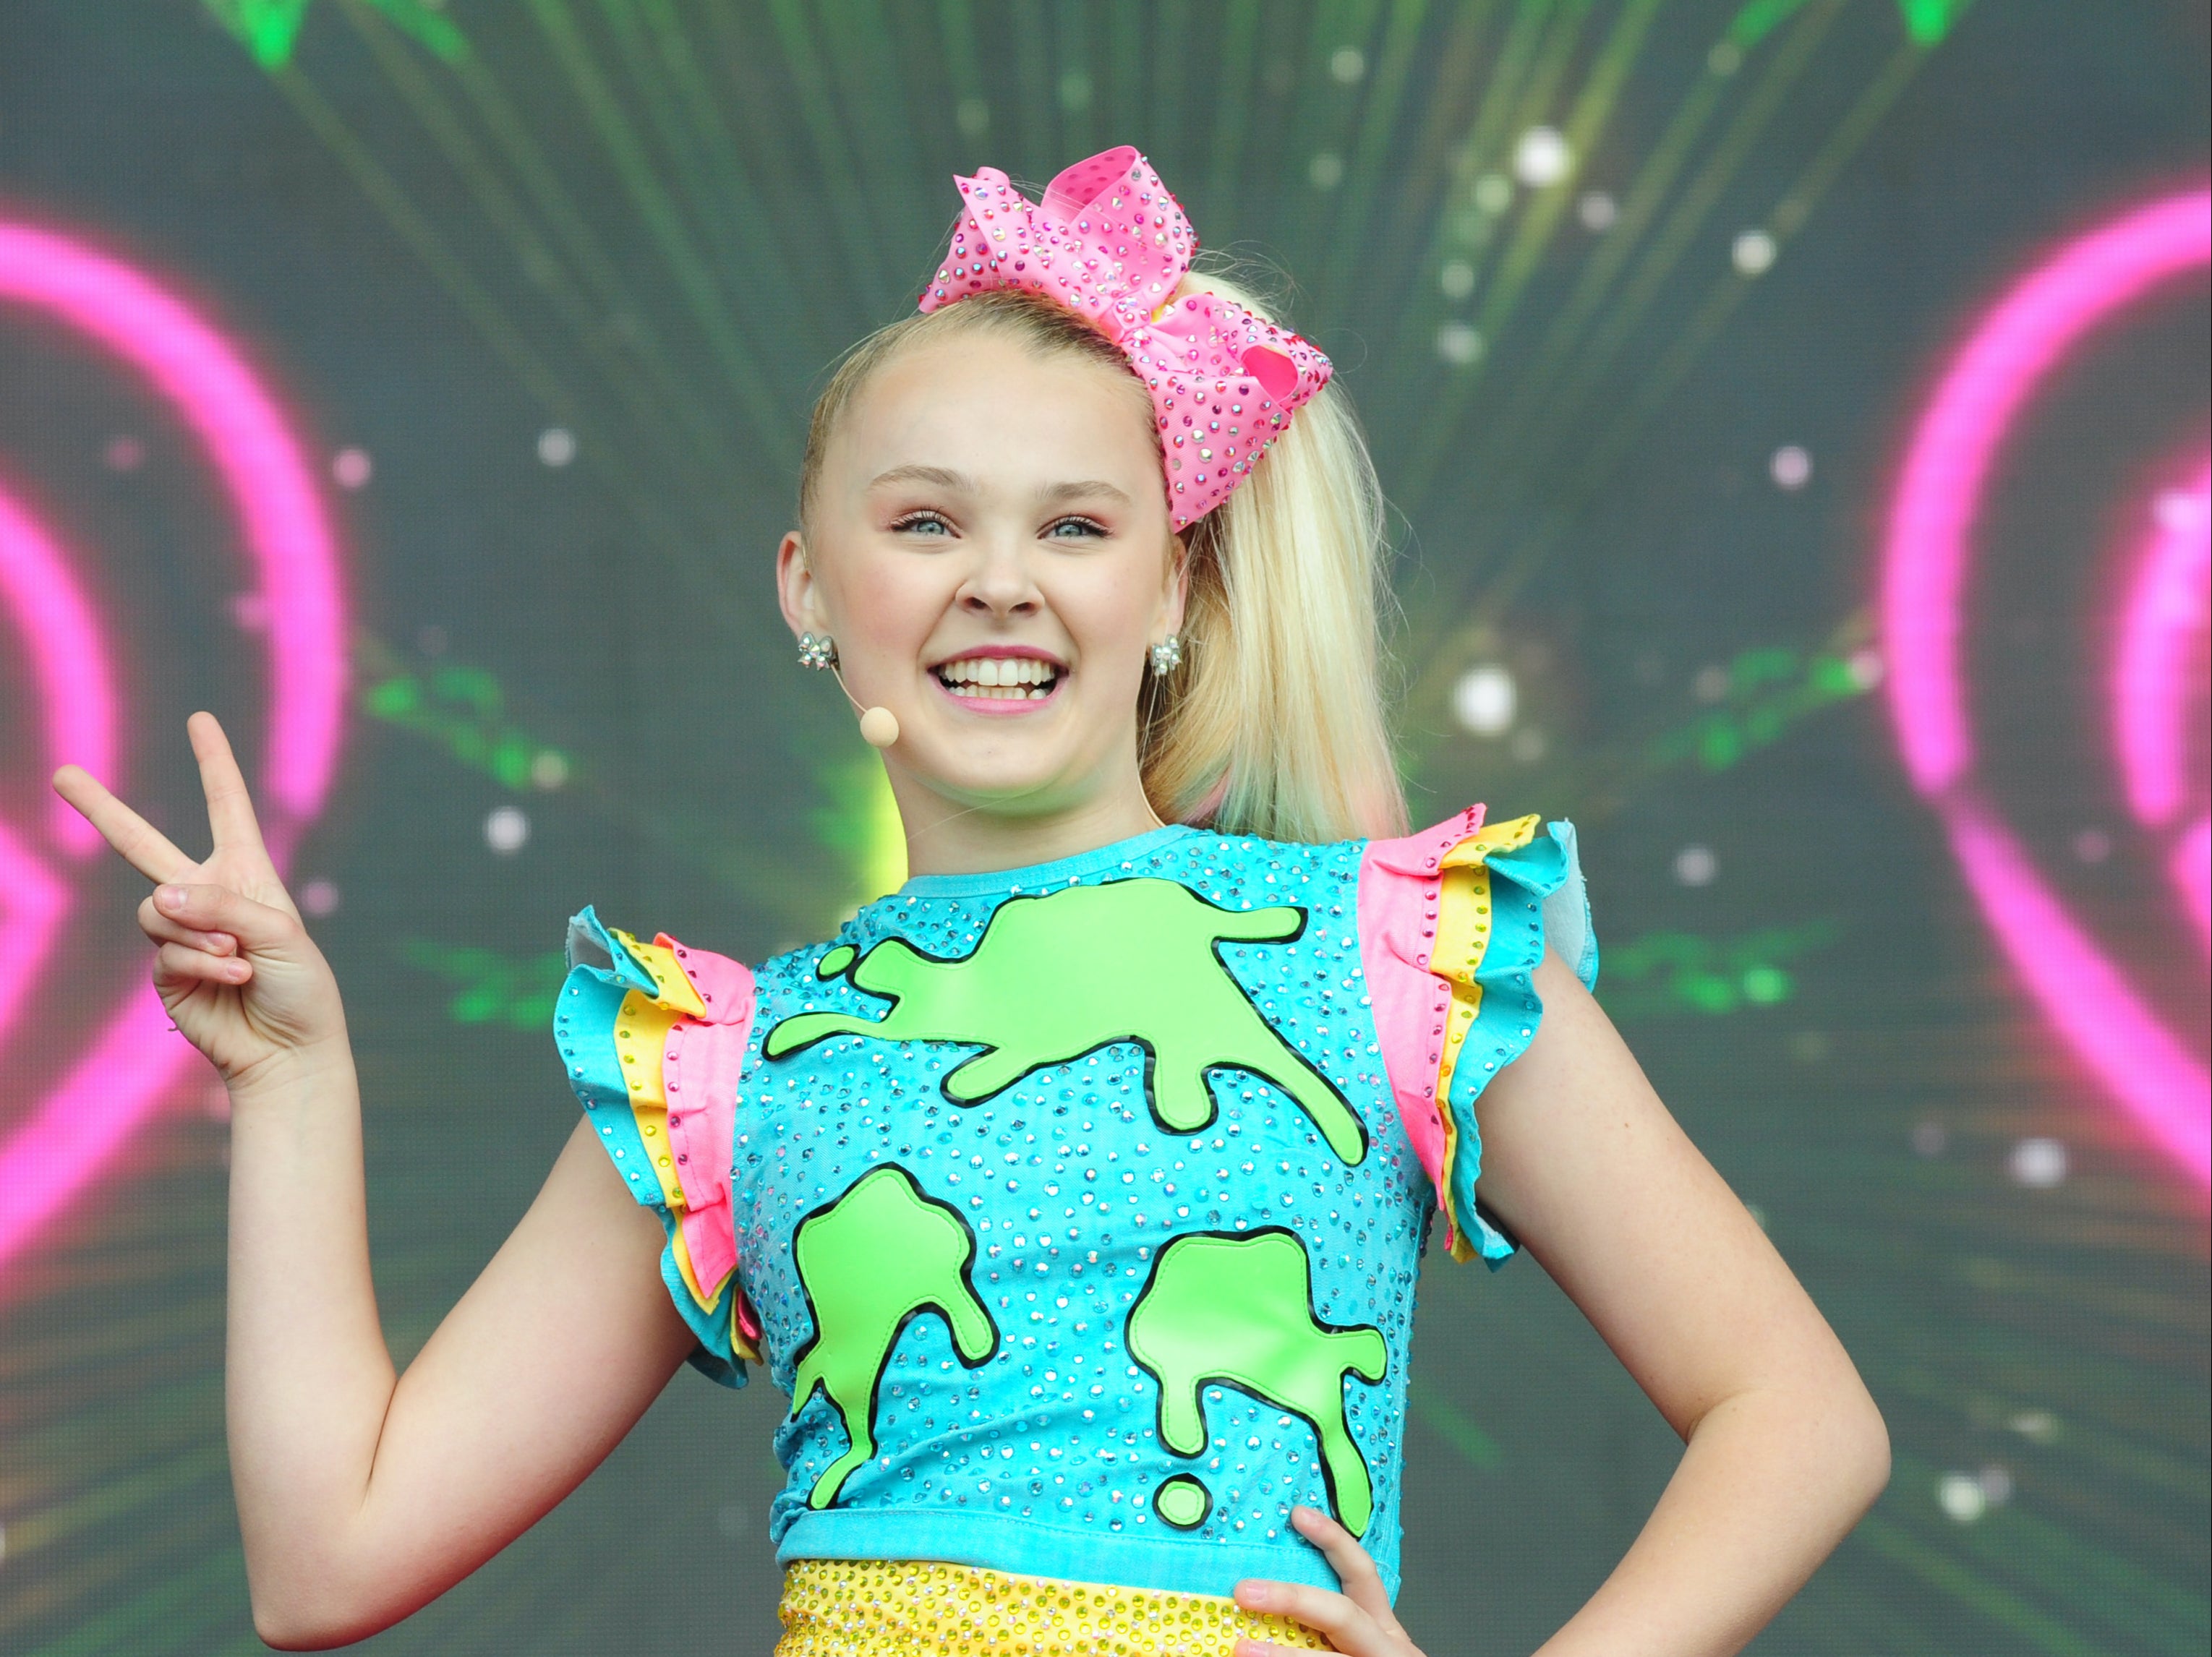 Youtube Star Jojo Siwa Comes Out As Gay The Independent My Xxx Hot Girl 2734